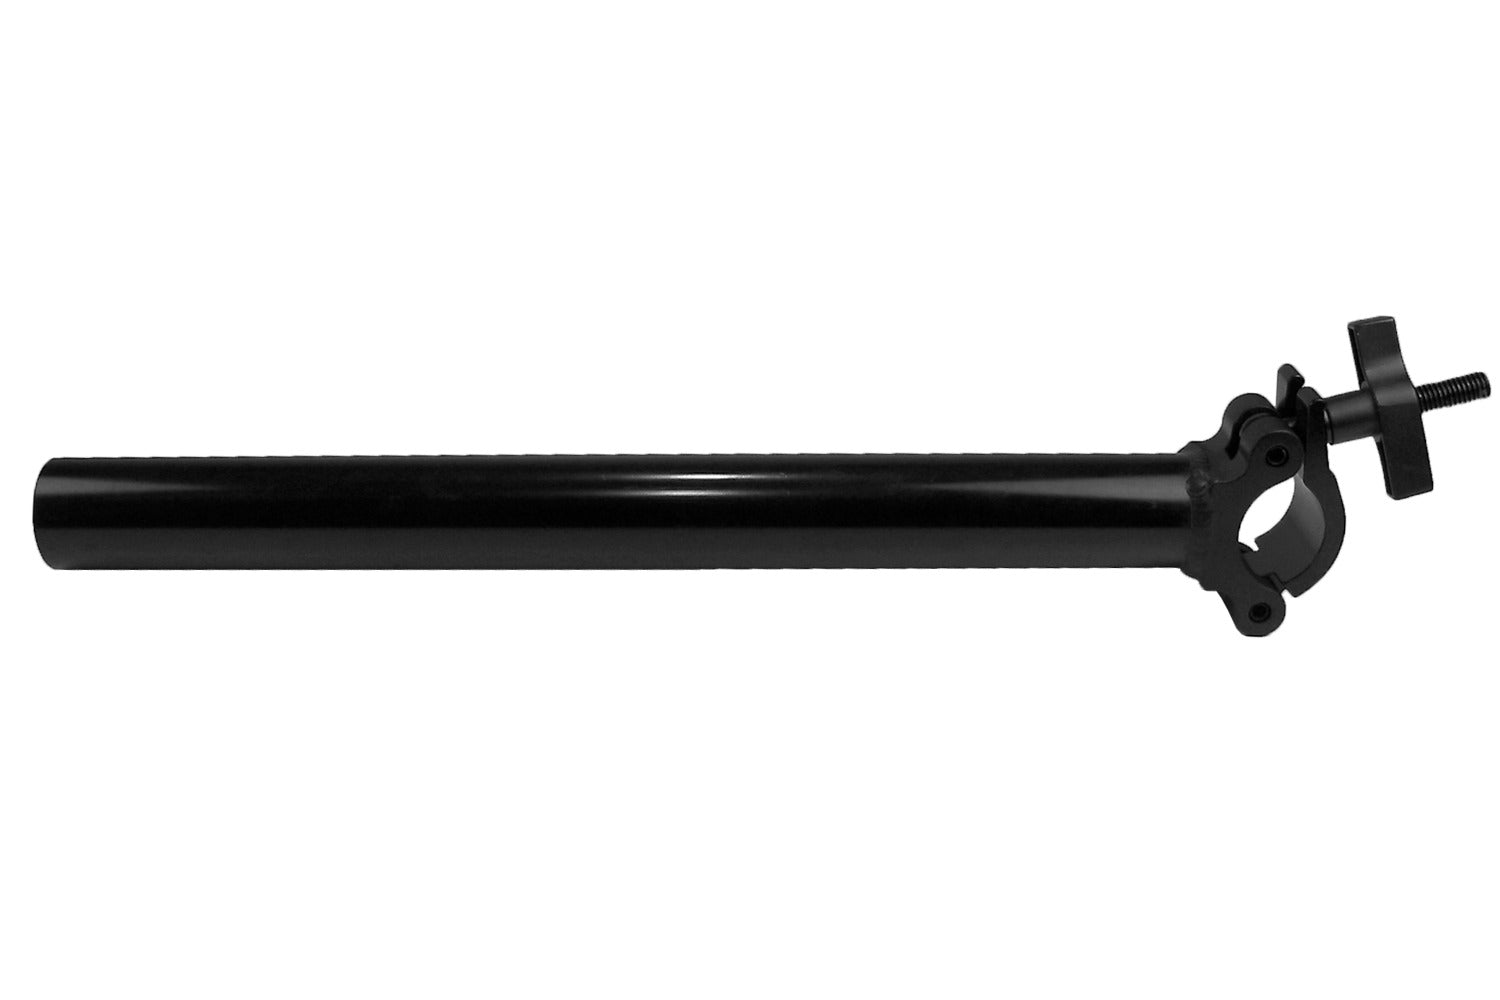 BOOMARM105B - 0.5m Boom Arm Pole with Single Pipe Clamp (Black)